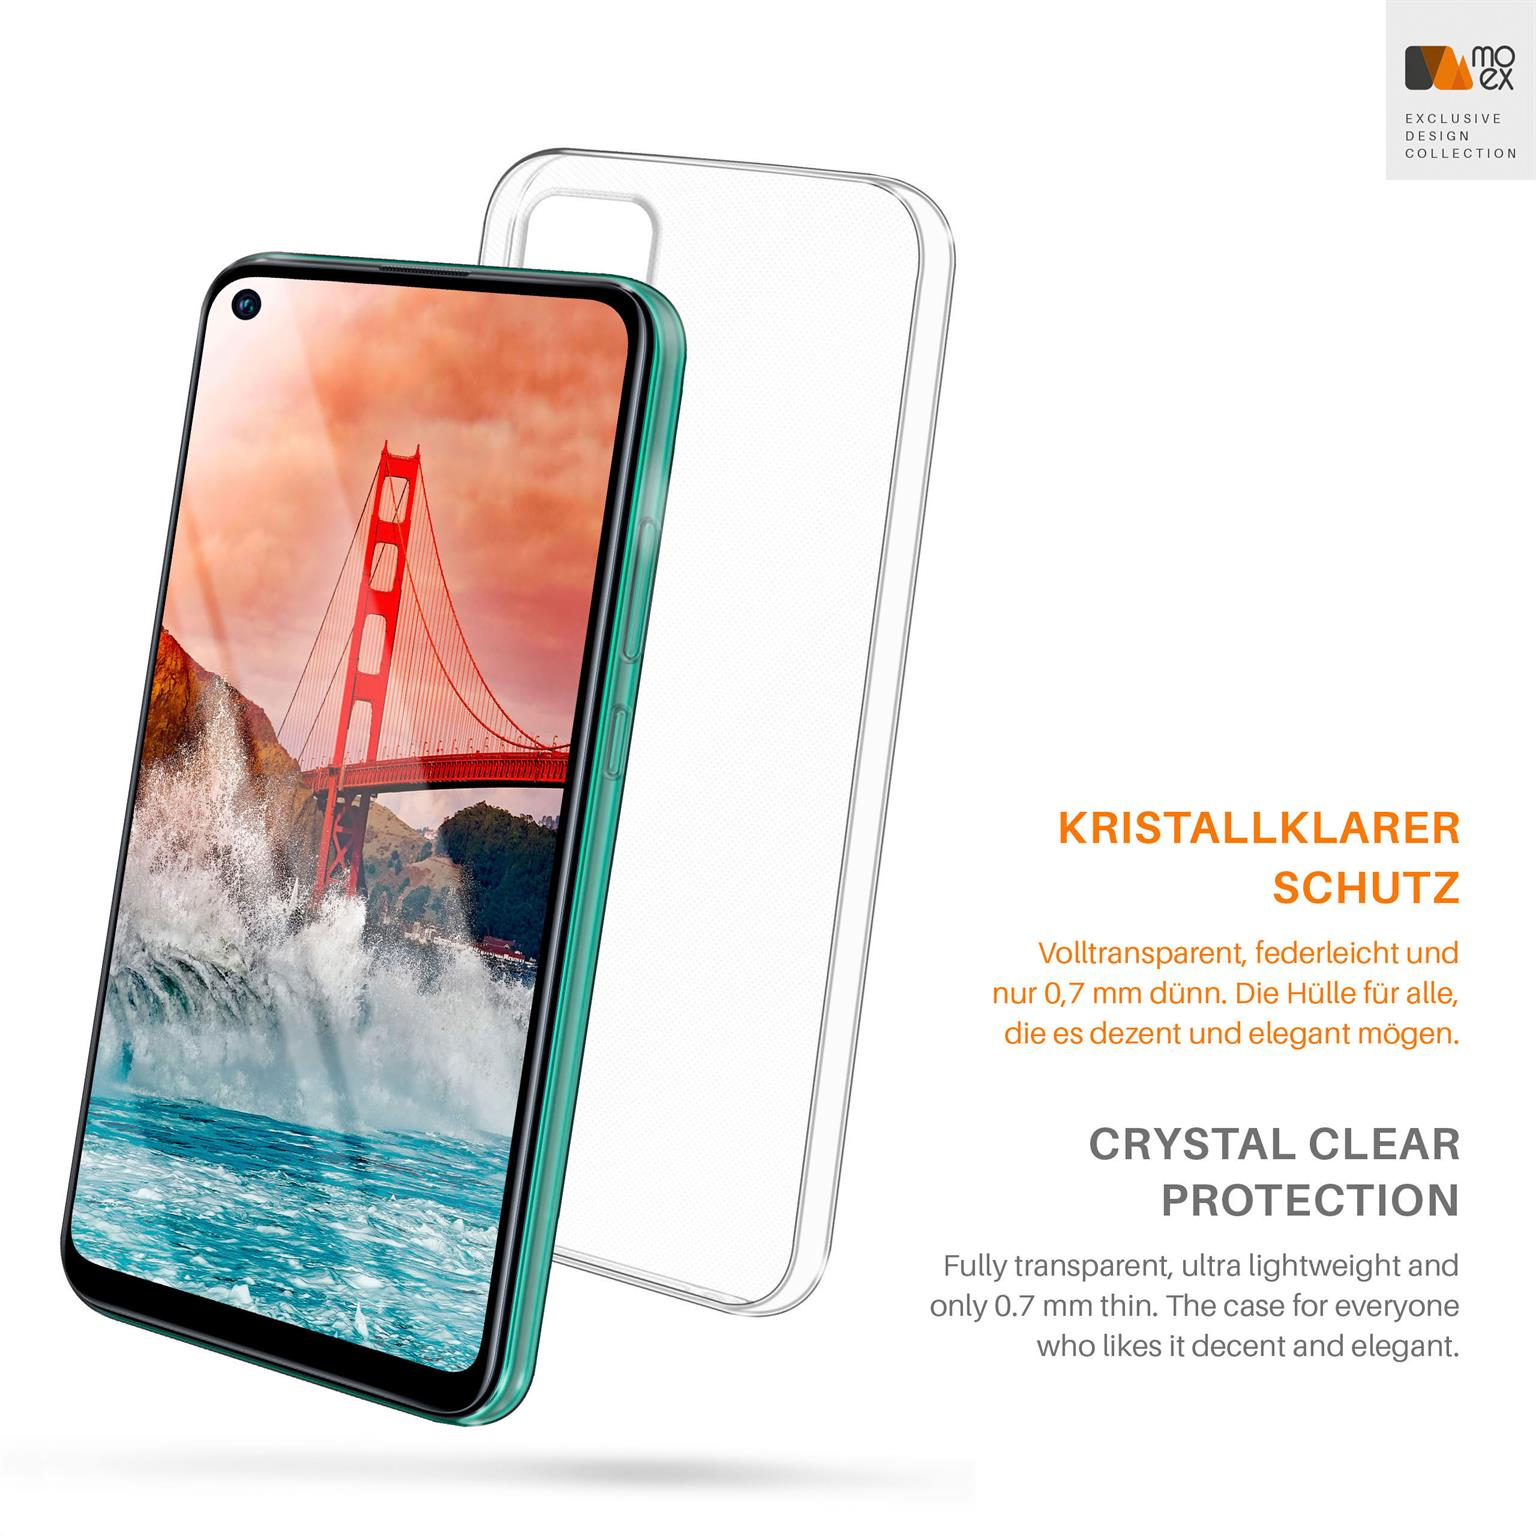 Crystal-Clear P40 MOEX Case, Huawei, Lite, Backcover, Aero